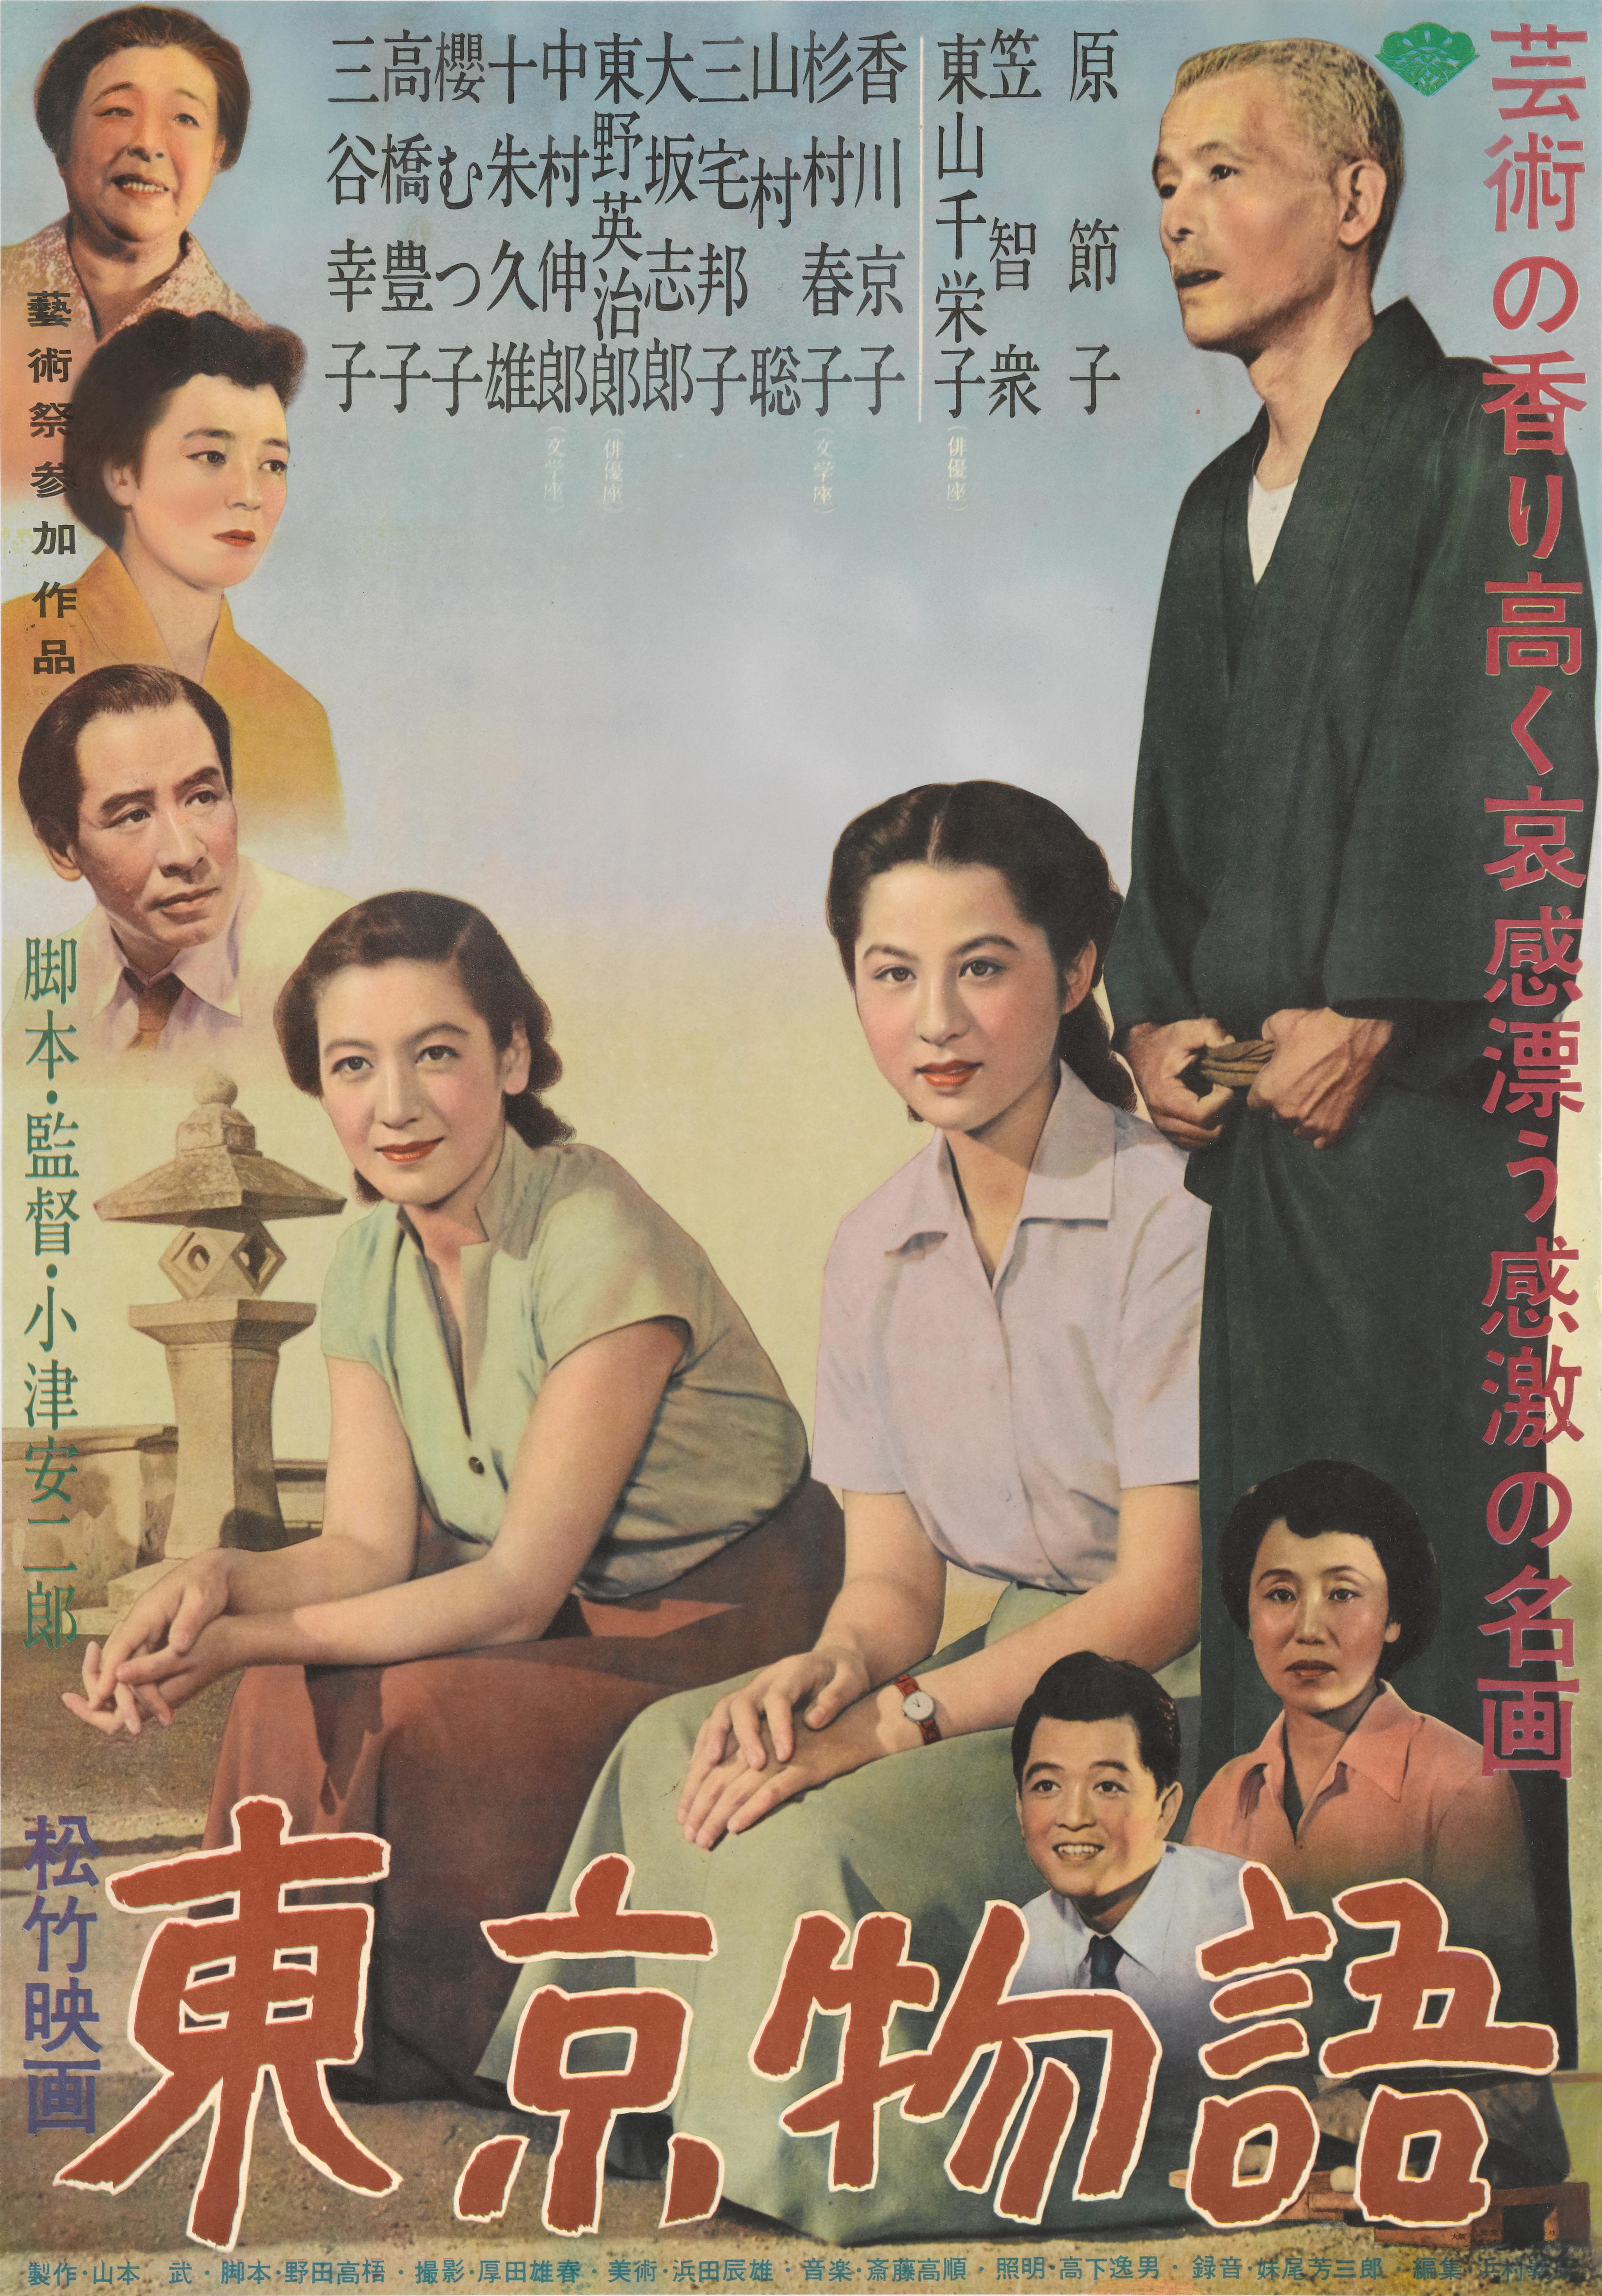 Original Japanese film poster for the 1953 drama directed by Yasujiro Ozy.
The film starred Chishu Ryu and Chieko Higashiyama.
One of Japan’s most celebrated and prolific directors, Yasujiro Ozu directed fifty-four films over the course of his